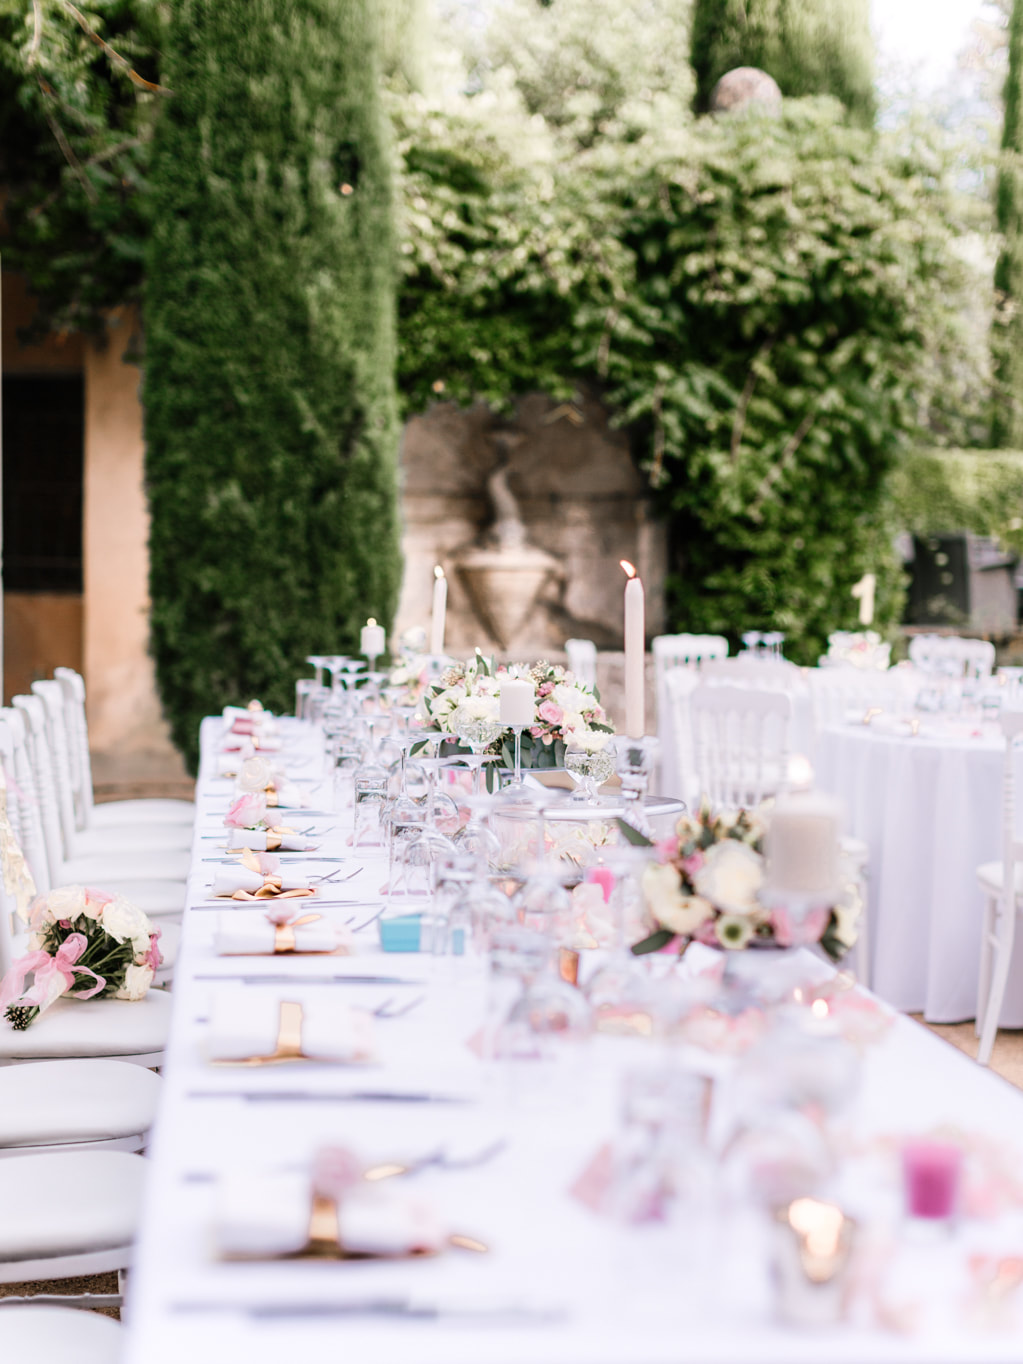 How To Have An Amazing Wedding On A Budget by The Belle Blog 